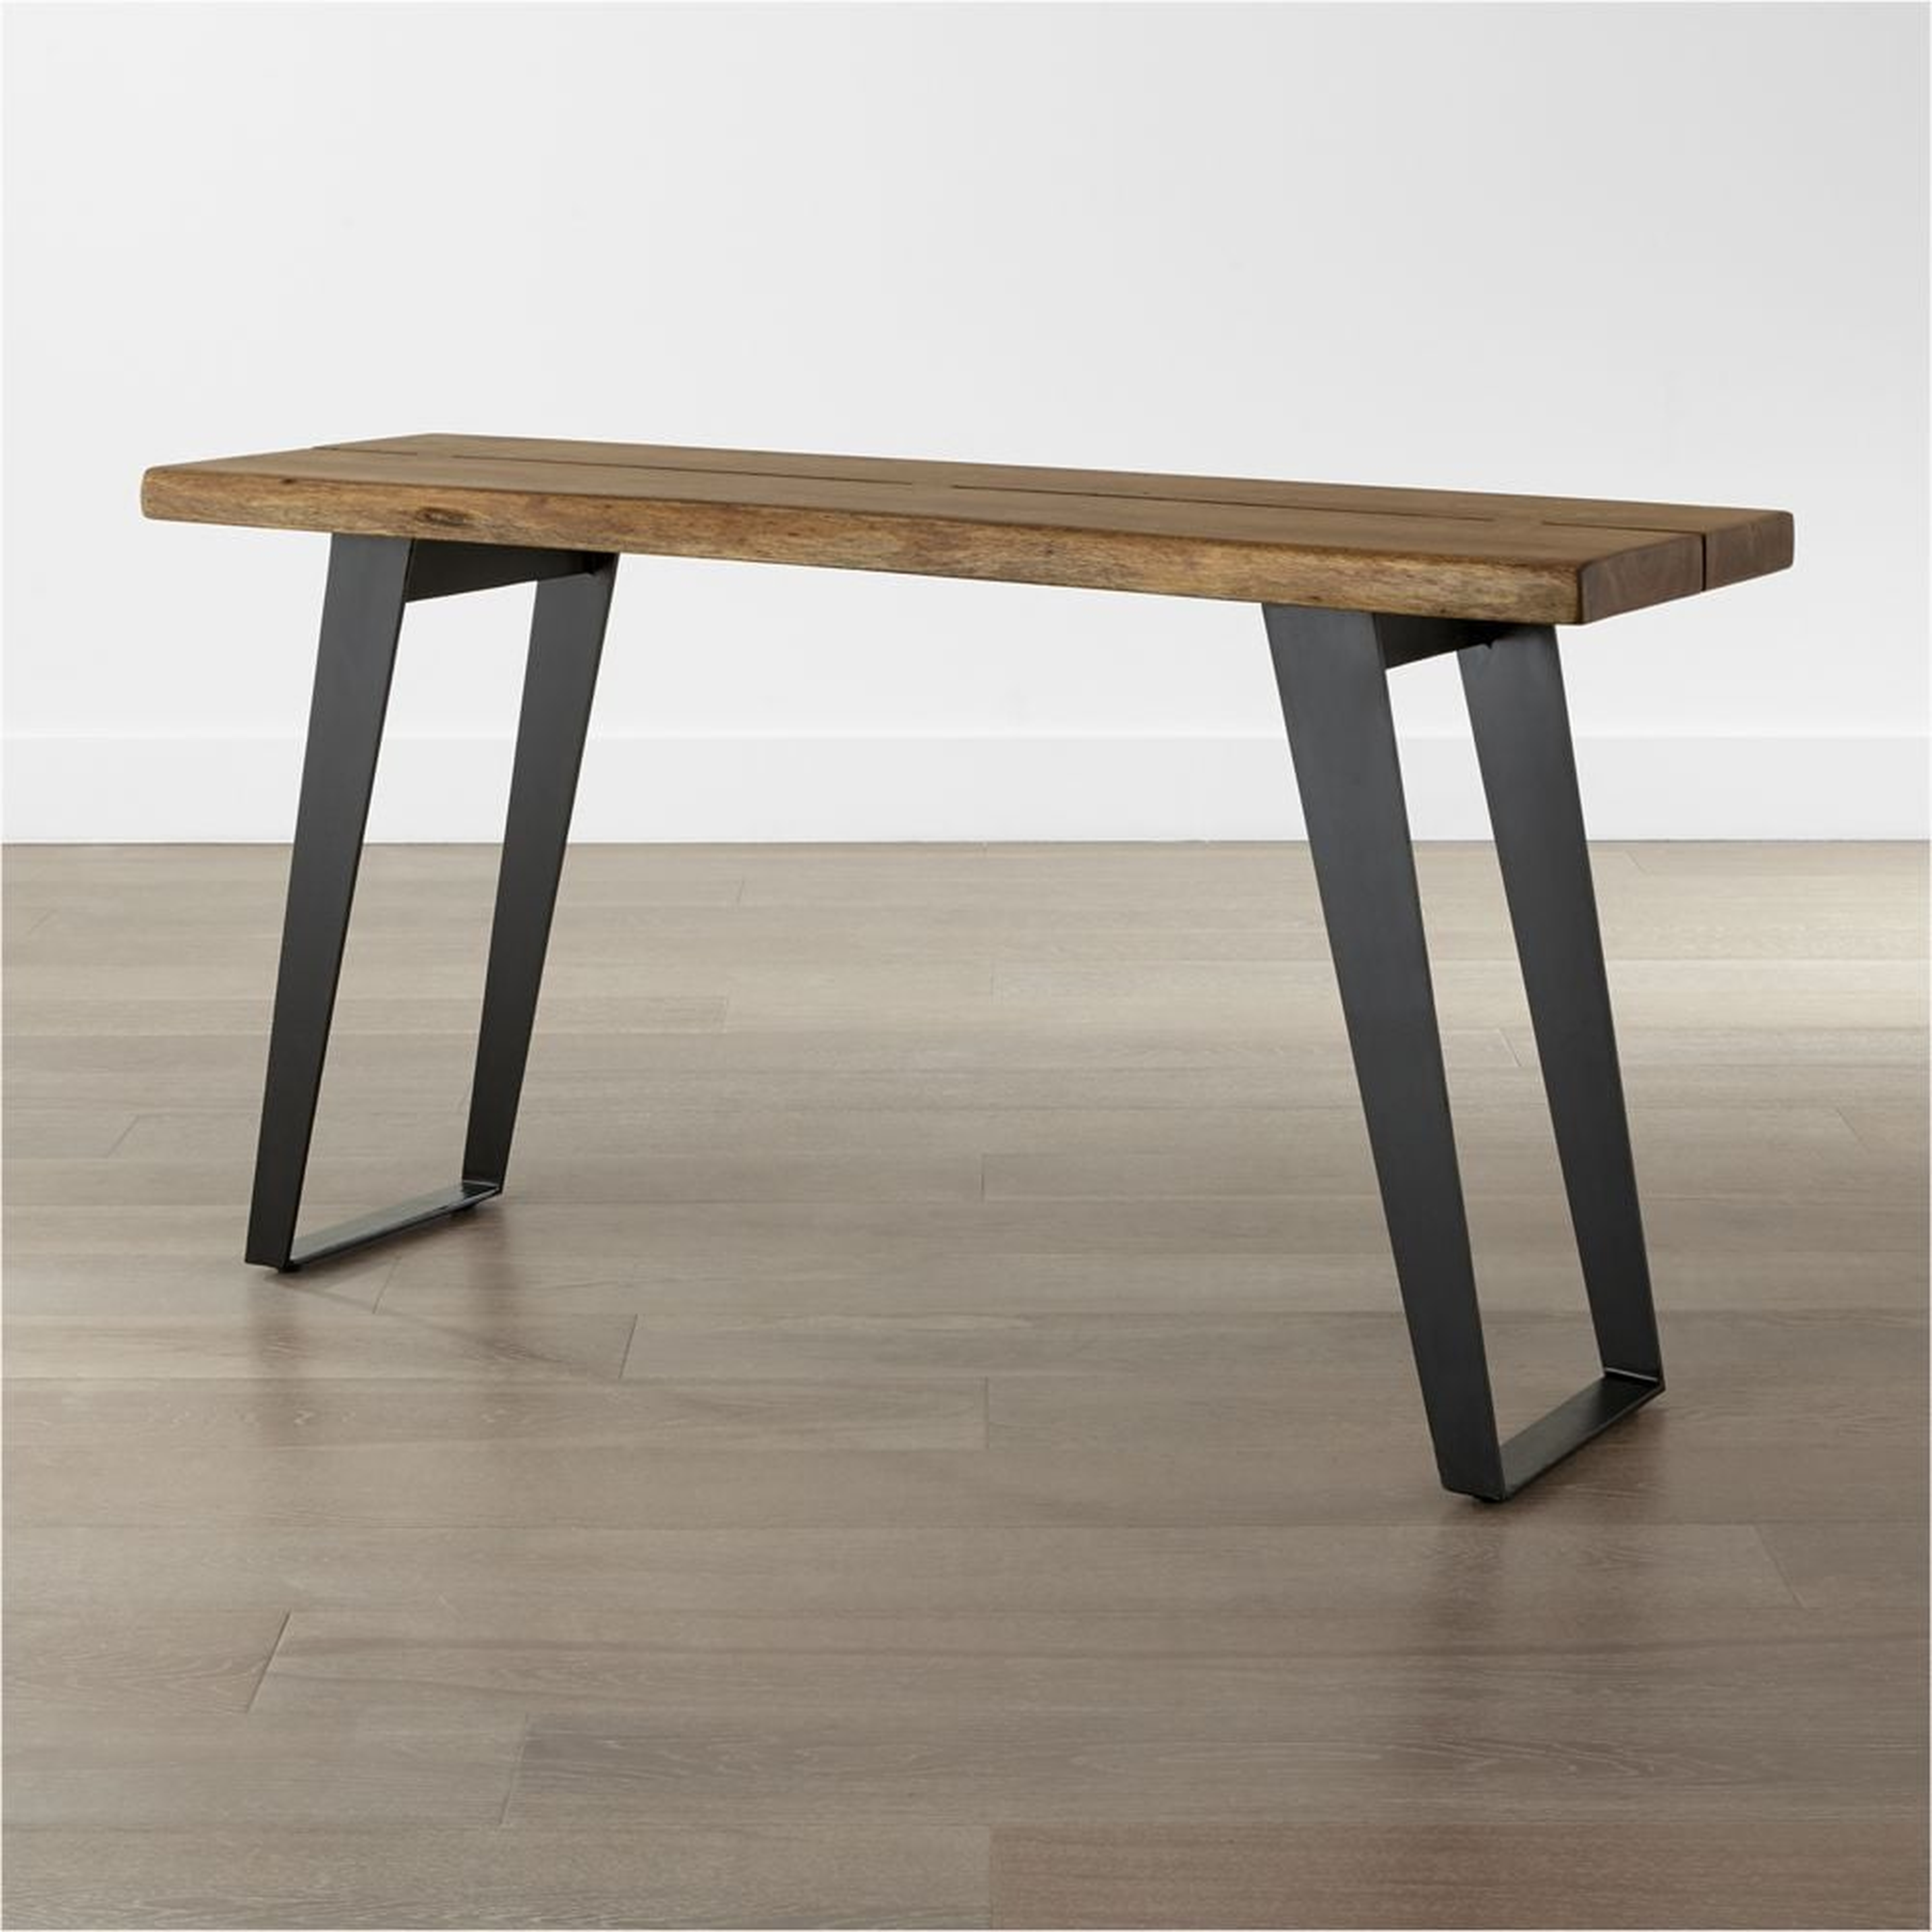 Yukon 57" Rectangular Warm Acacia Live Edge Solid Wood and Metal Console Table - Crate and Barrel